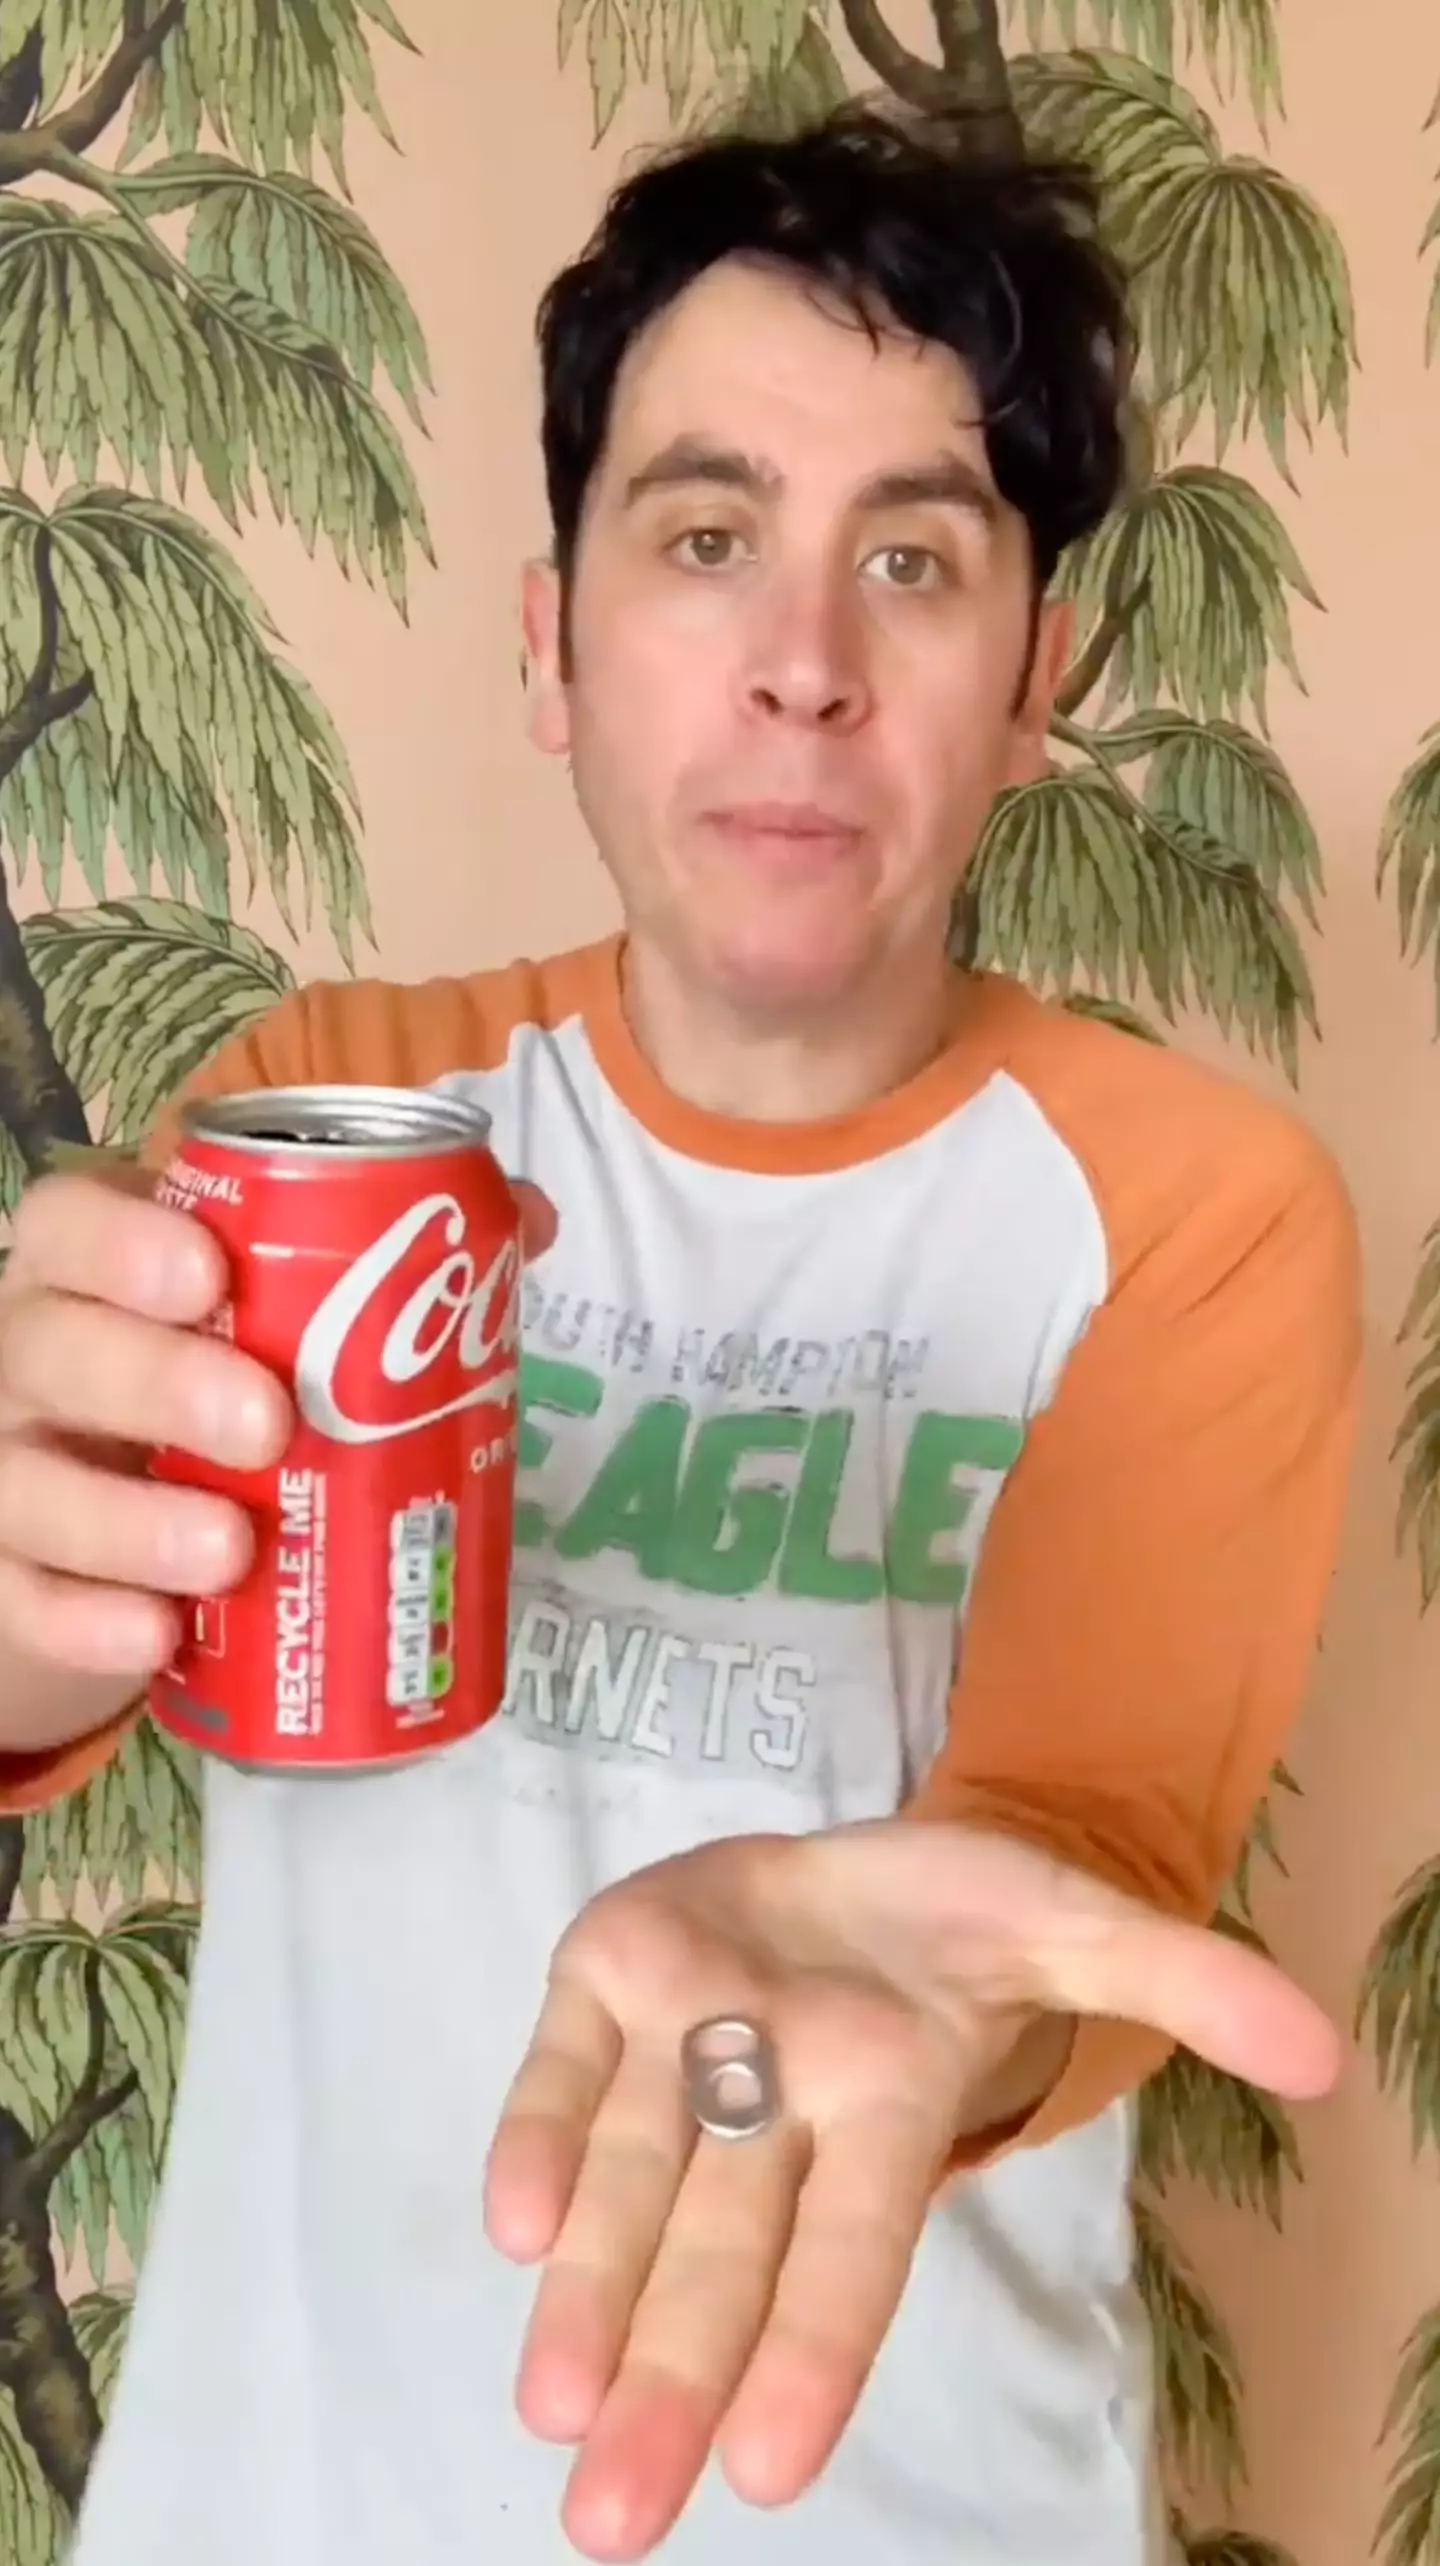 Pete takes the ring-pull off the Coke can first...